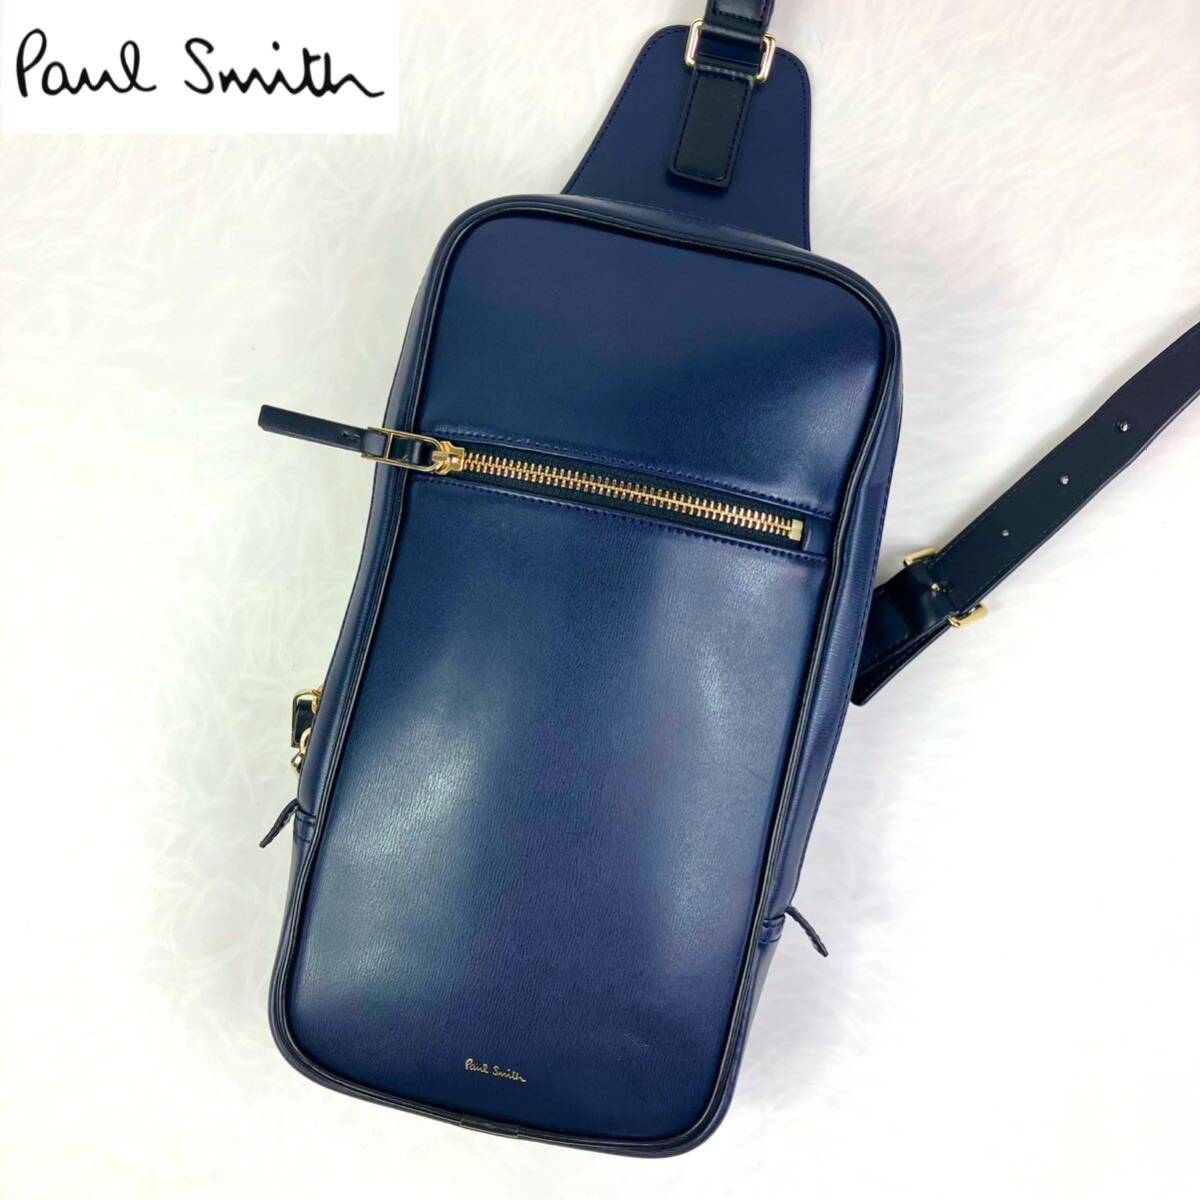  ultimate beautiful goods / present *Paul Smith Paul Smith body bag shoulder bag all leather multi stripe navy navy blue men's business 